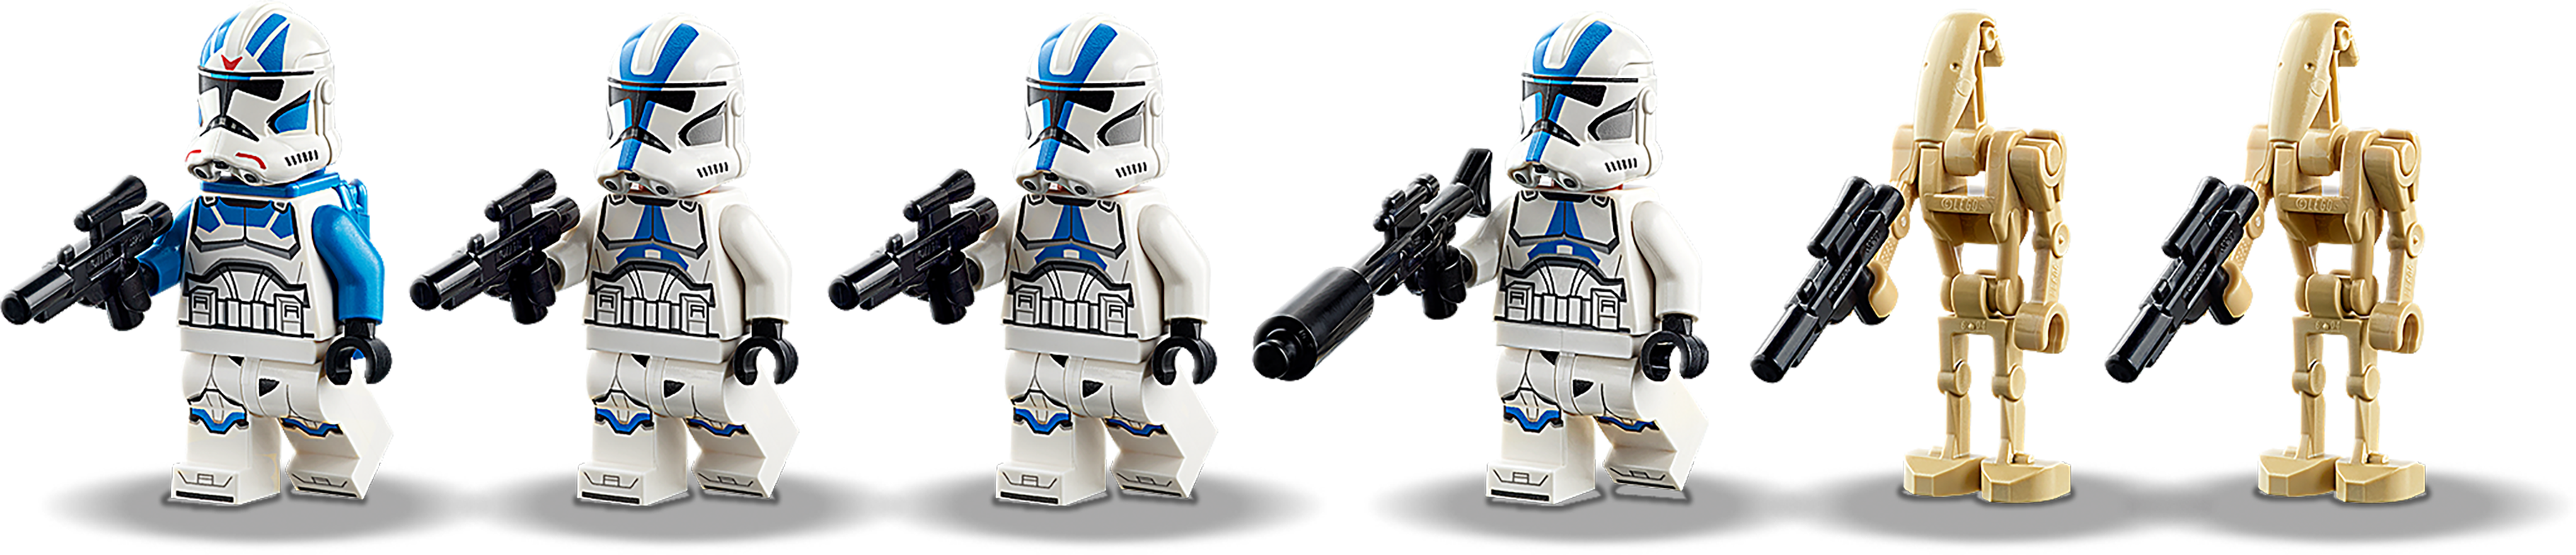 LEGO STAR WARS-Custom 51ST Clone Troopers-Lego compatible Army Builder/LOT 